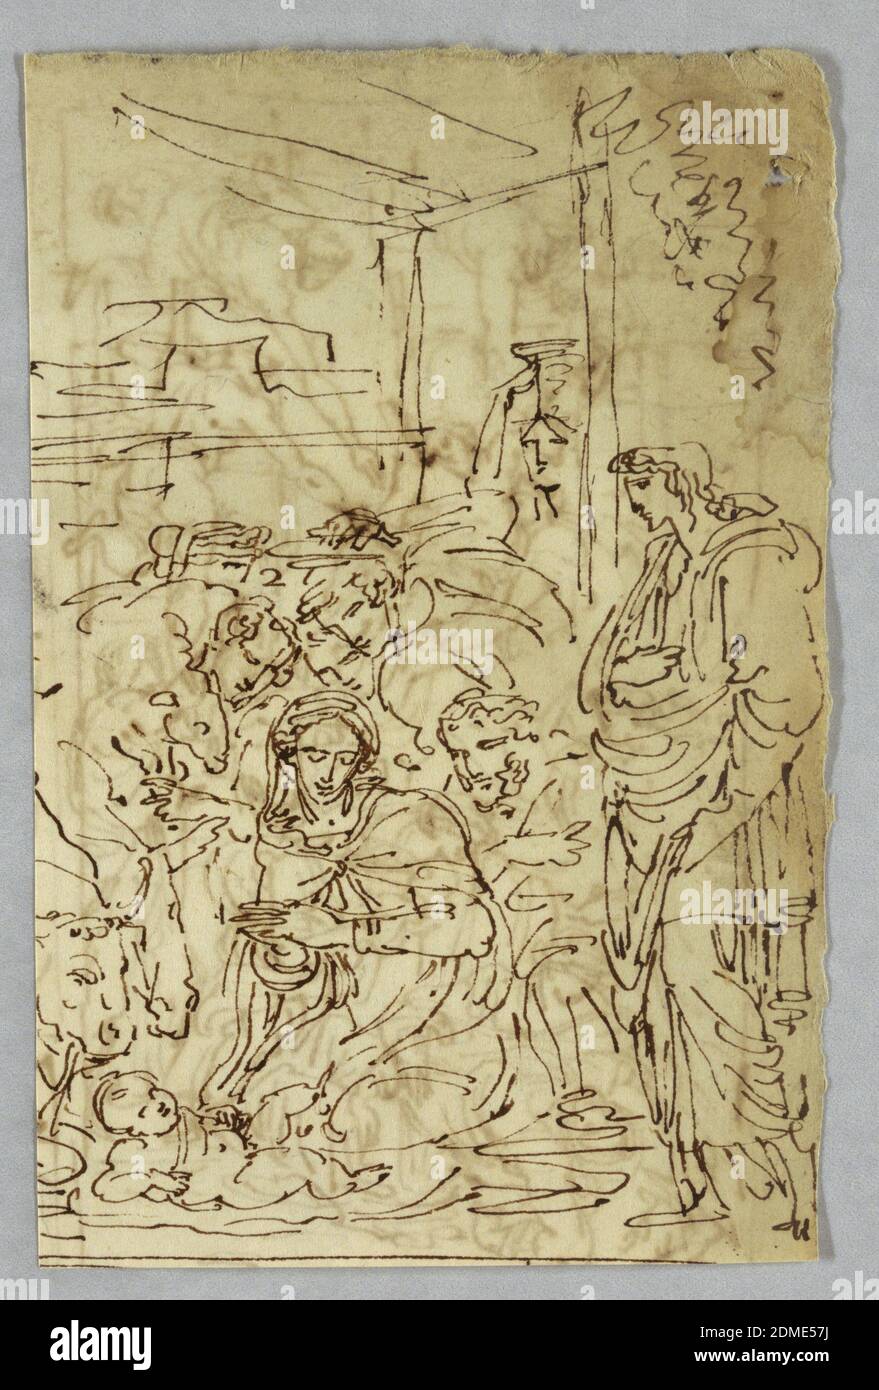 Adoration of the Shepherds; Arcangle St. Michael after Raphael; St. Margarite after Raphael; Aloof de Wignancourt by Caravaggio; Putti; Study of the Flood; Verso: Disposition after Volterra; St. Ceclia after Raphael; Portion of Marriage of Henry IV to..., Felice Giani, Italian, 1758–1823, Pen and dark brown ink on cream laid paper., Adoration of the Shepherds; Arcangle St. Michael after Raphael; St. Margarite after Raphael; Aloof de Wignancourt by Caravaggio; Putti; Study of the Flood; Verso: Disposition after Volterra; St. Ceclia after Raphael Stock Photo